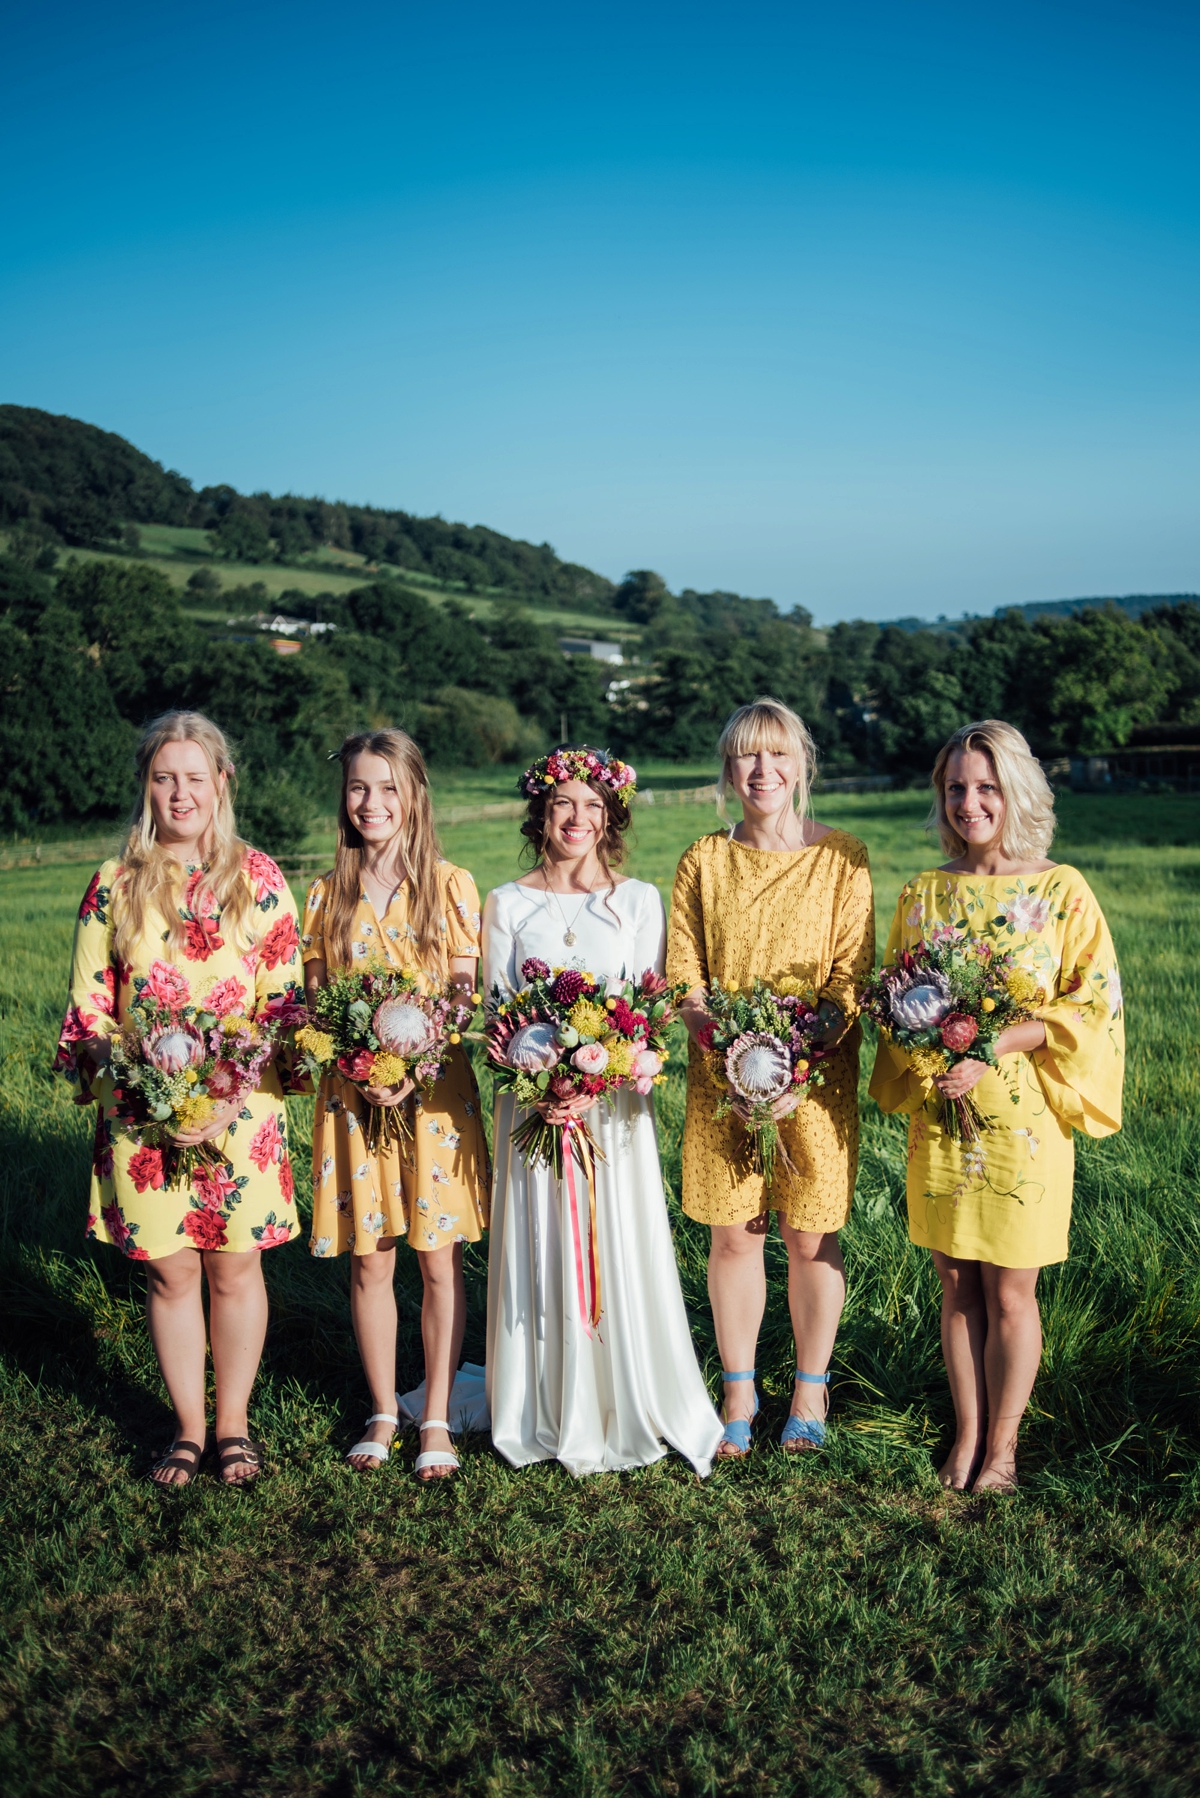 42 A handmade and natural outdoor wedding in Devon